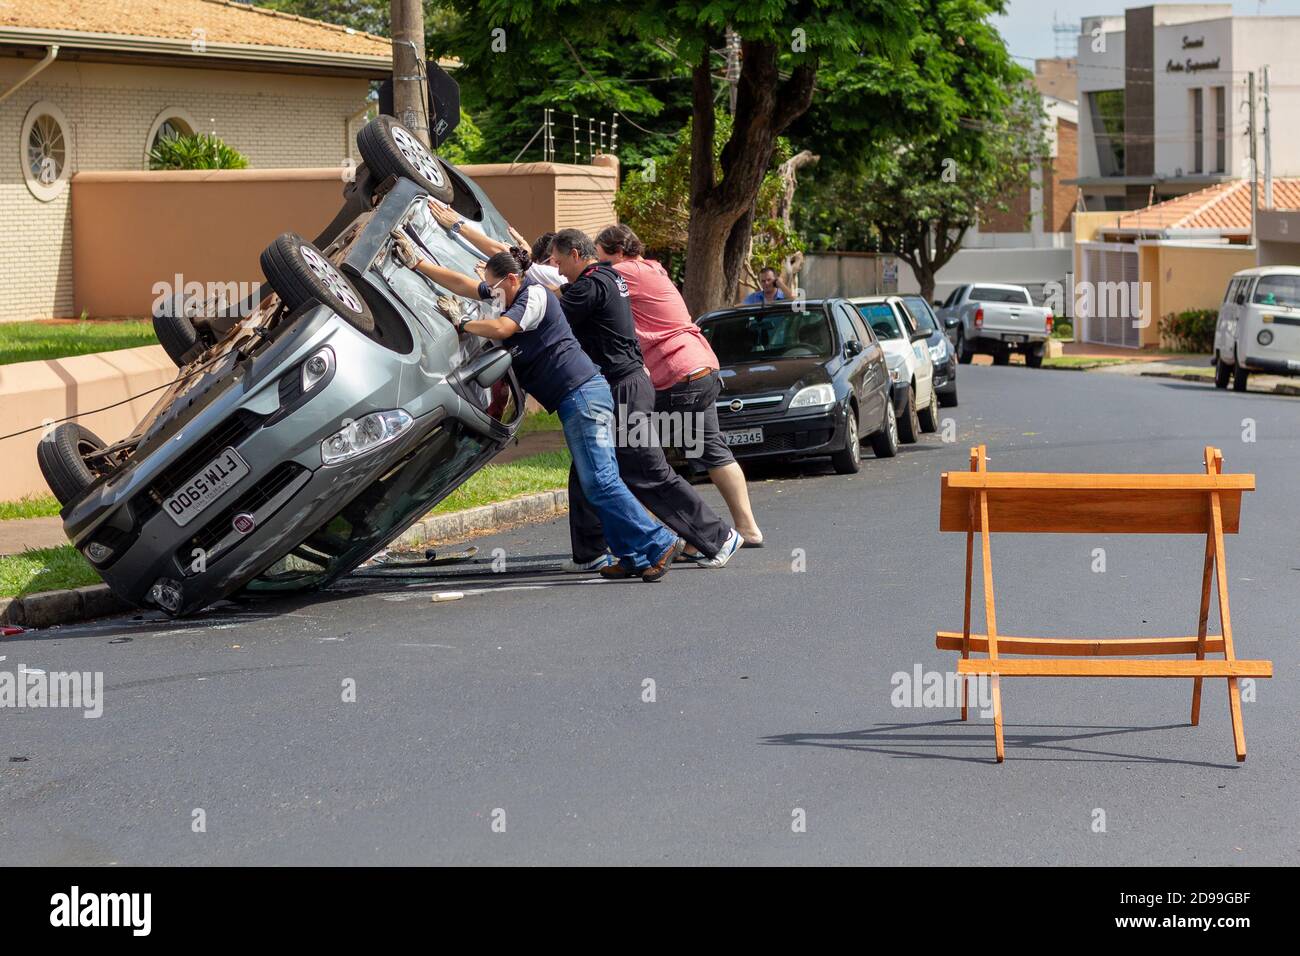 Ribeirao Preto, Brazil - January 21 2015: People help pull out an overturned car after a collision Stock Photo